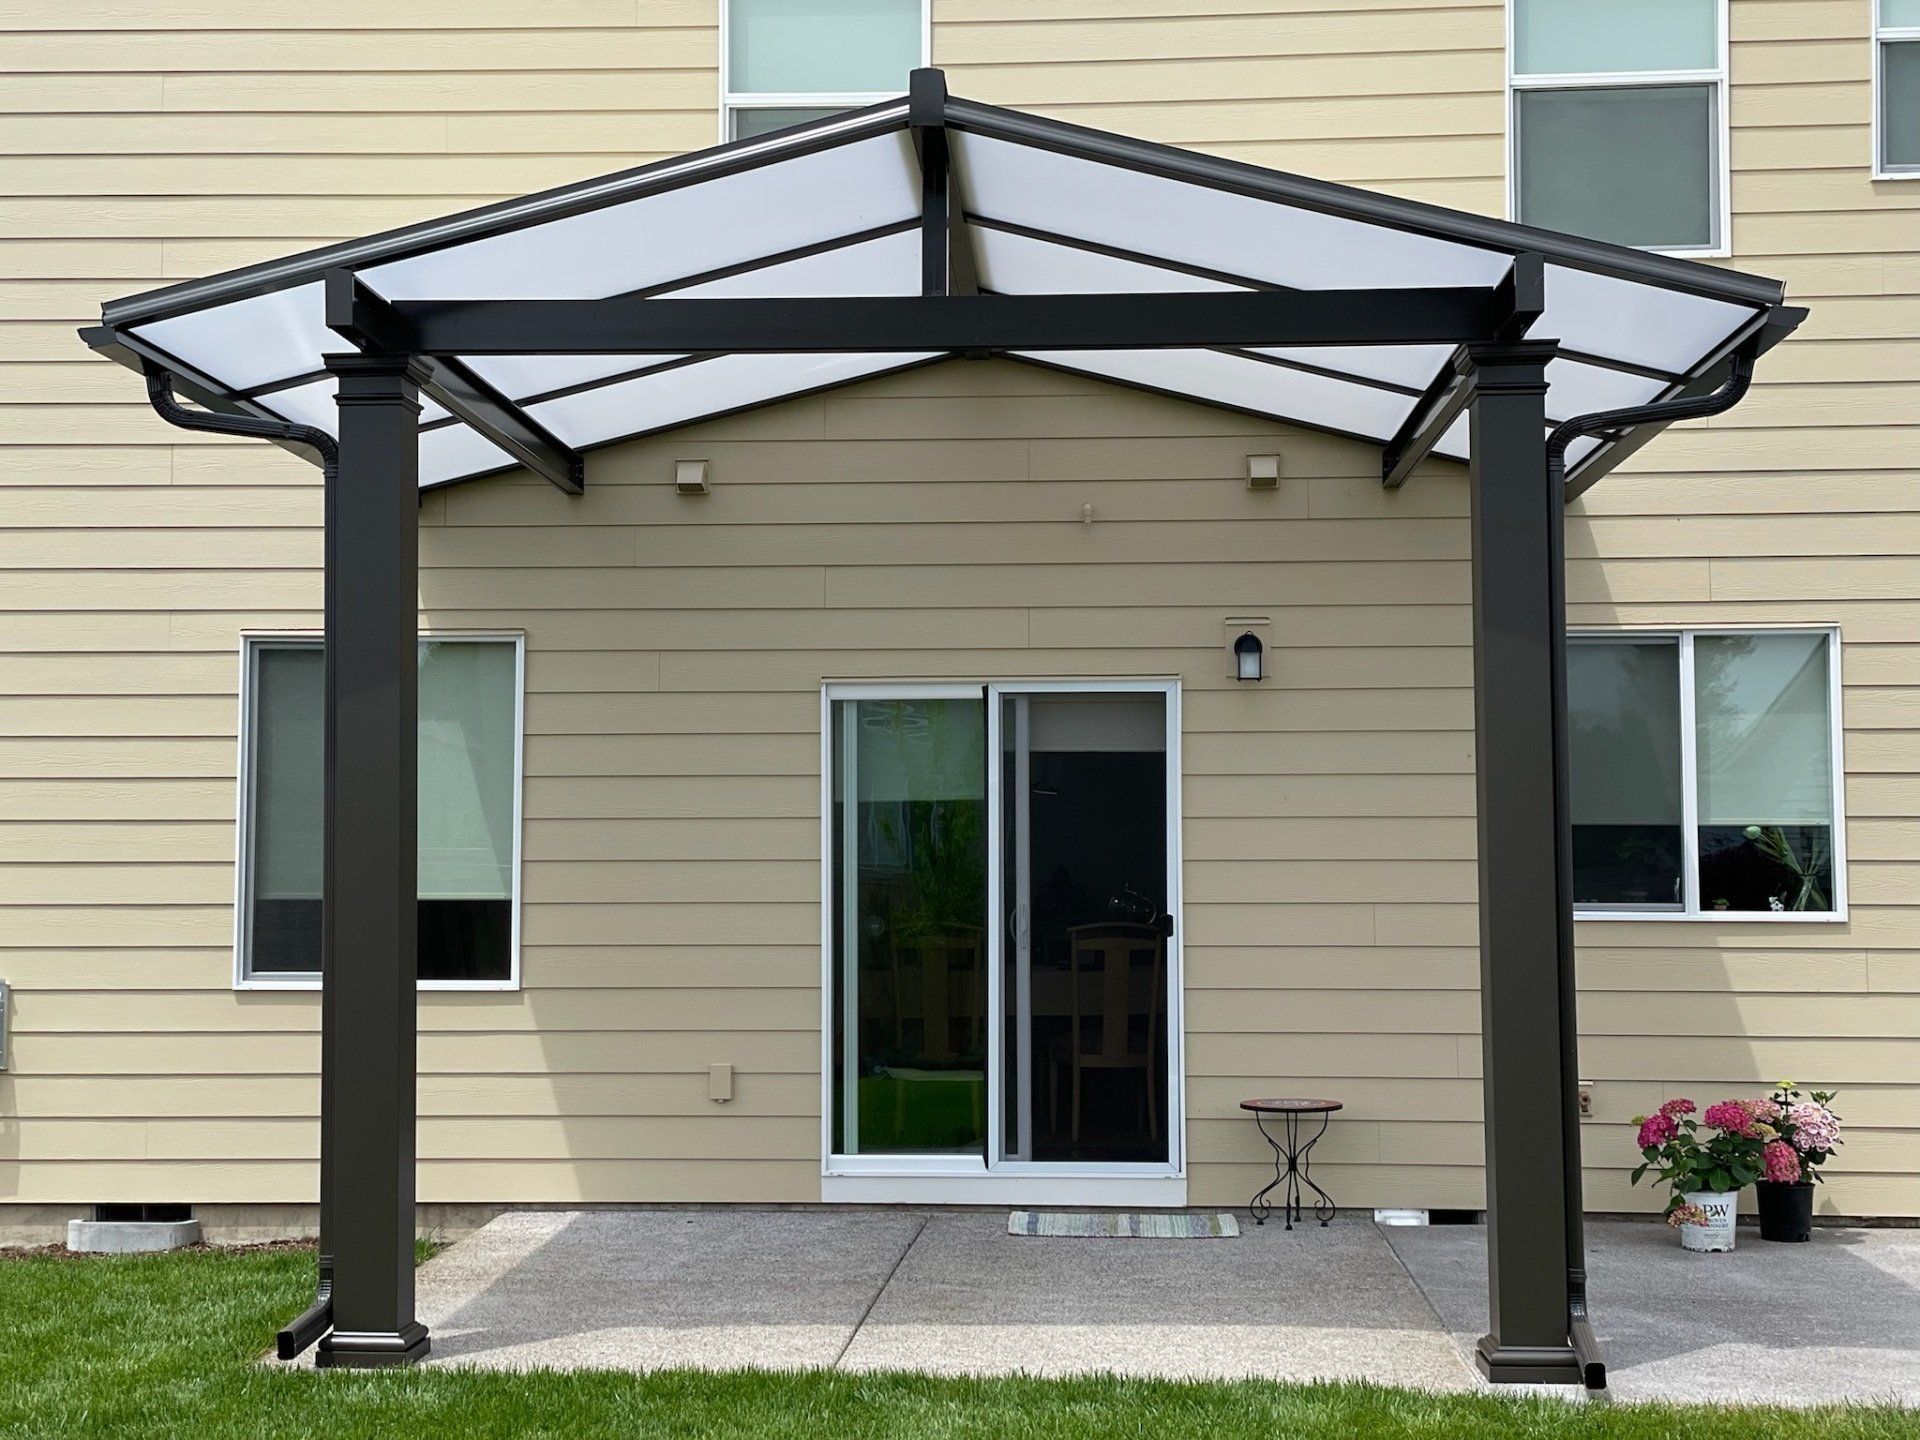 Patio Cover Contractor in Tigard - Crown Patio Covers Process